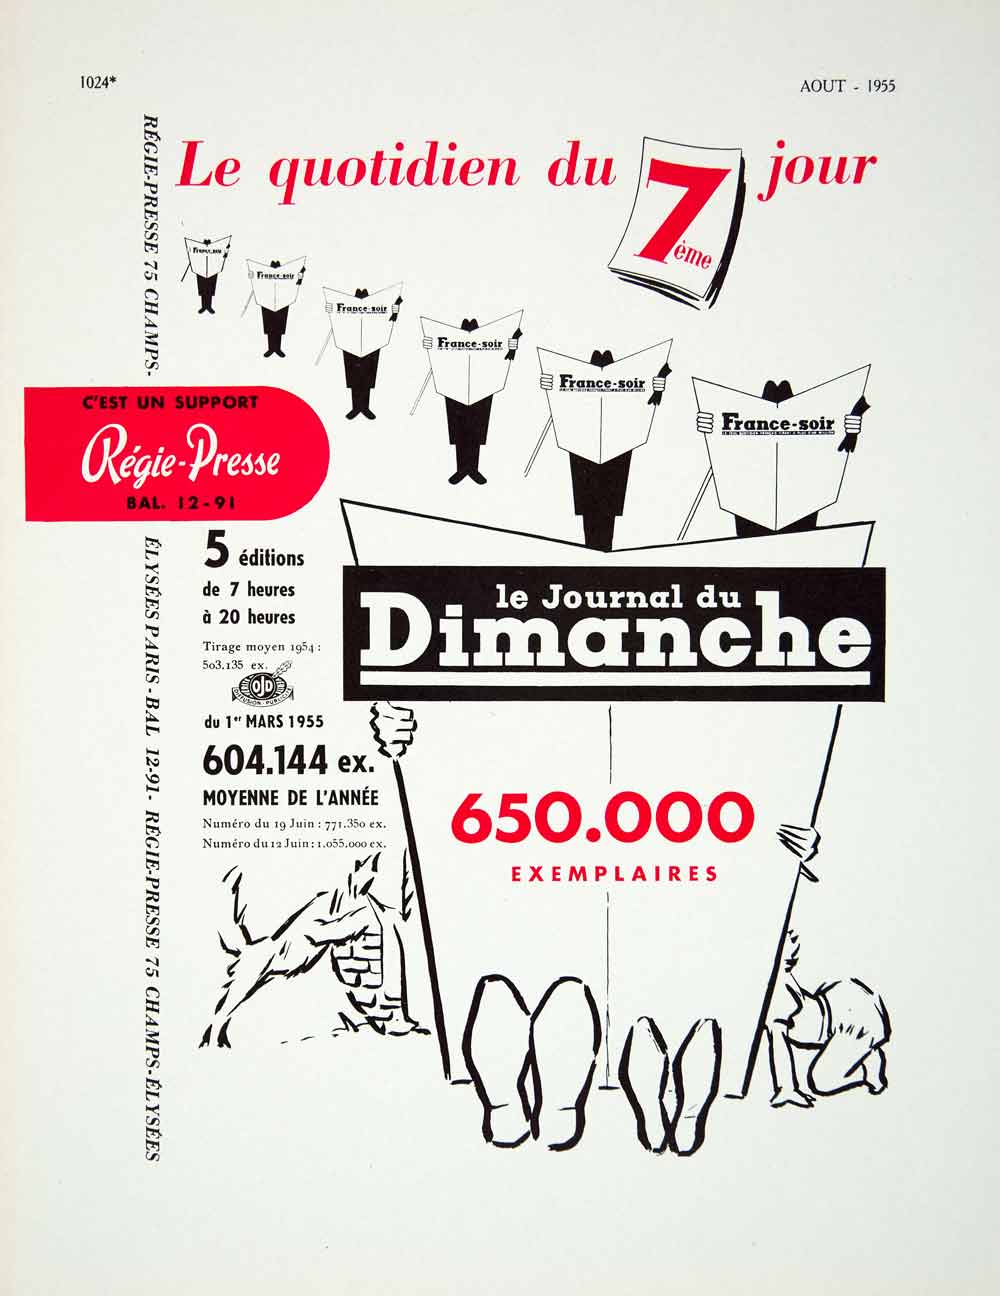 1955 Lithograph Vintage Ad Le Journal du Dimanche French Weekly Newspaper VENA4